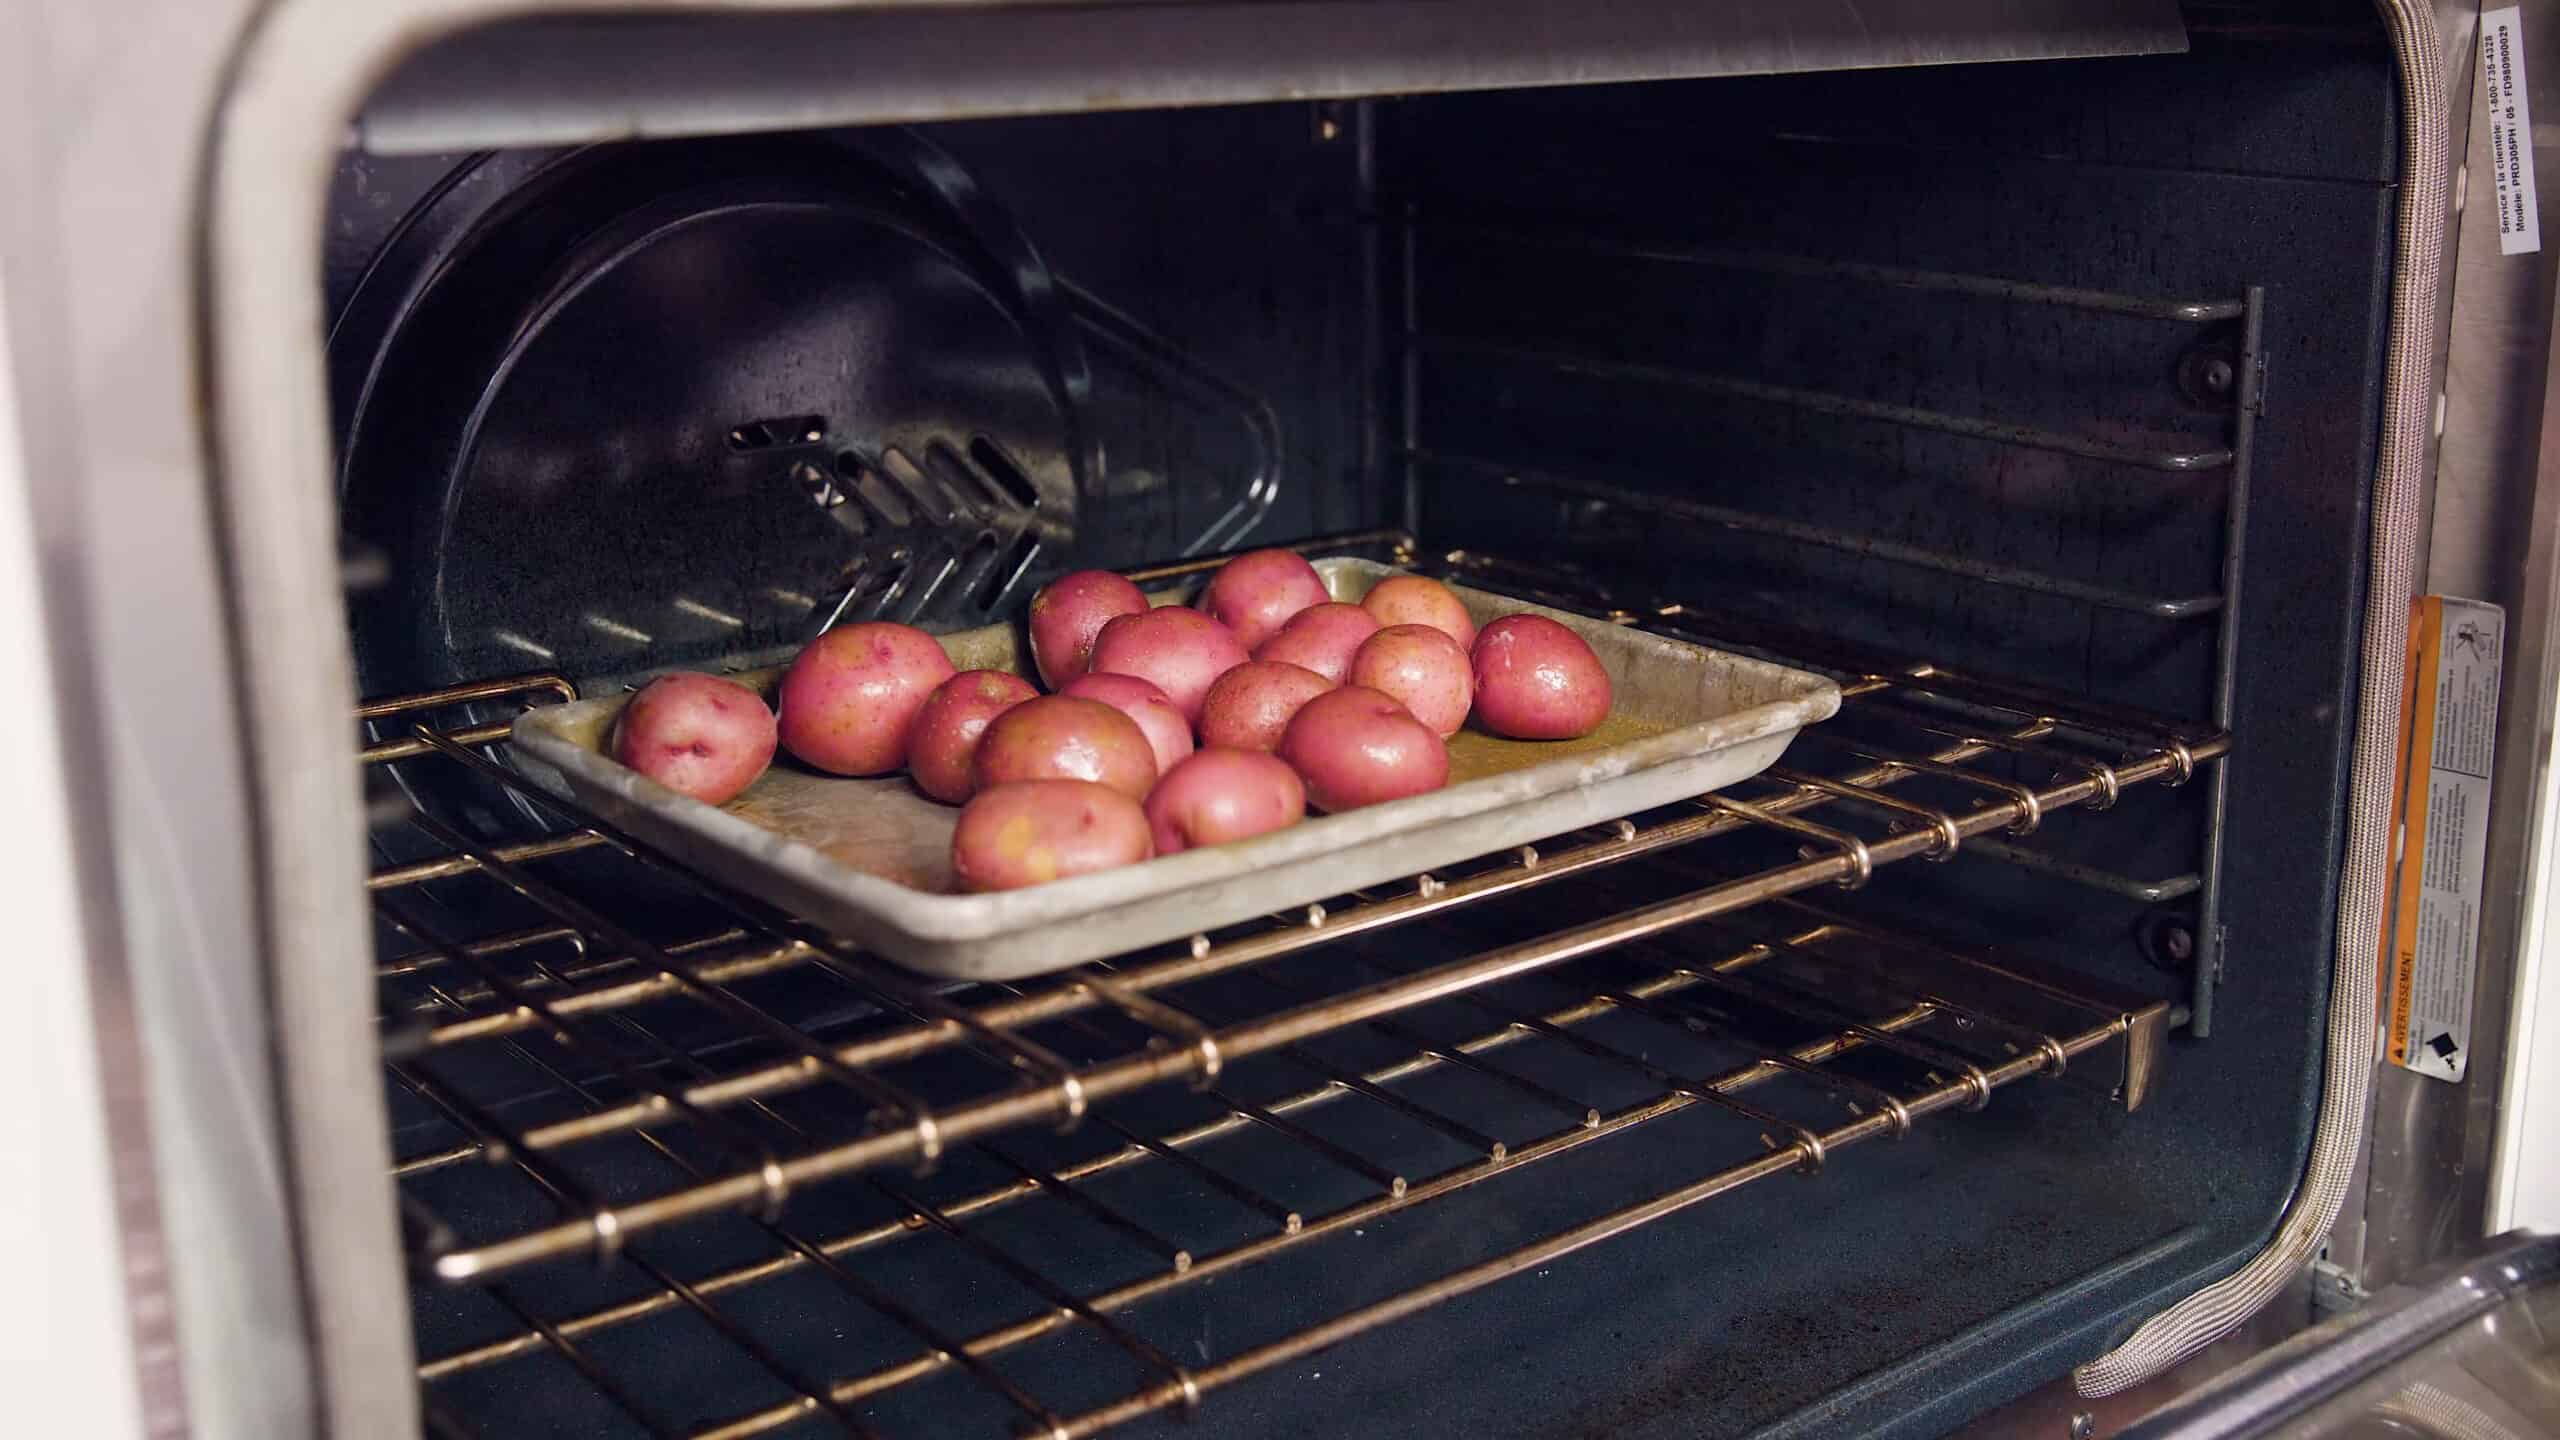 Angled view of open oven with a metal baking sheet with about one dozen red potatoes placed on a metal rack in the middle of the oven.